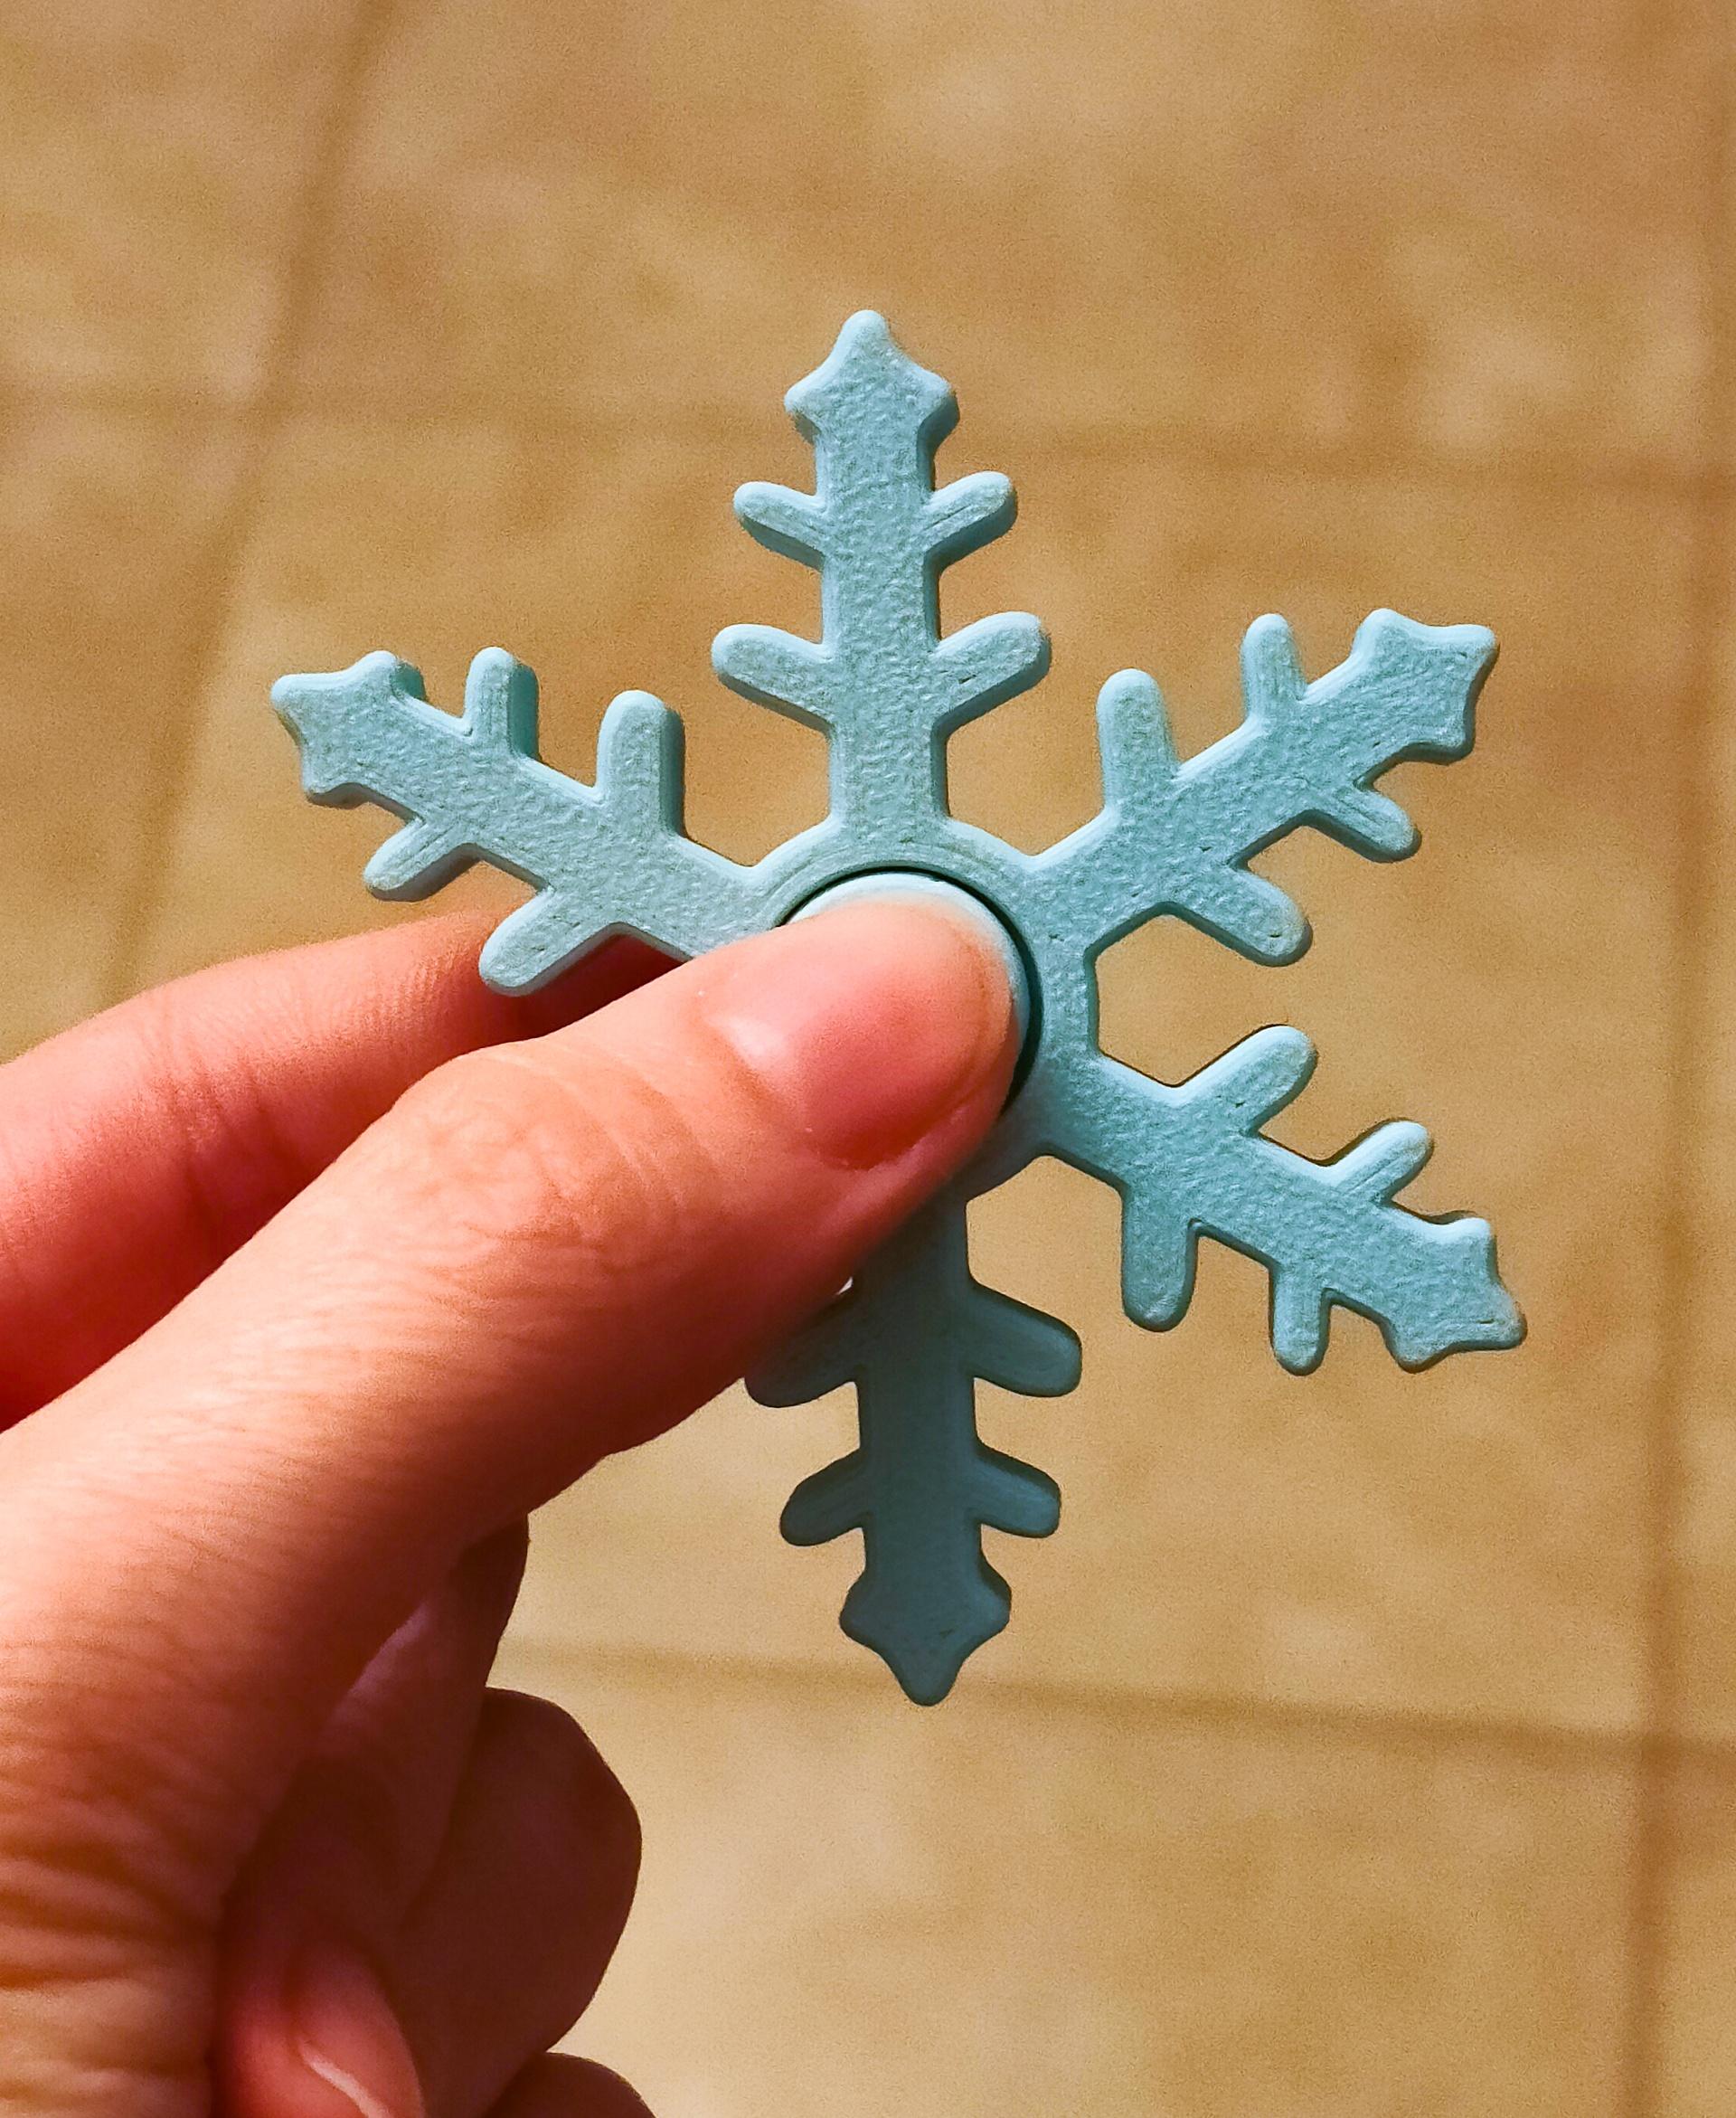 Snowflake Fidget Spinner (Classic) - Scaled and printed a bit smaller than the original size.
Printed with Gratkit Matte Baby Blue PLA on a Bambu Lab A1 mini. - 3d model